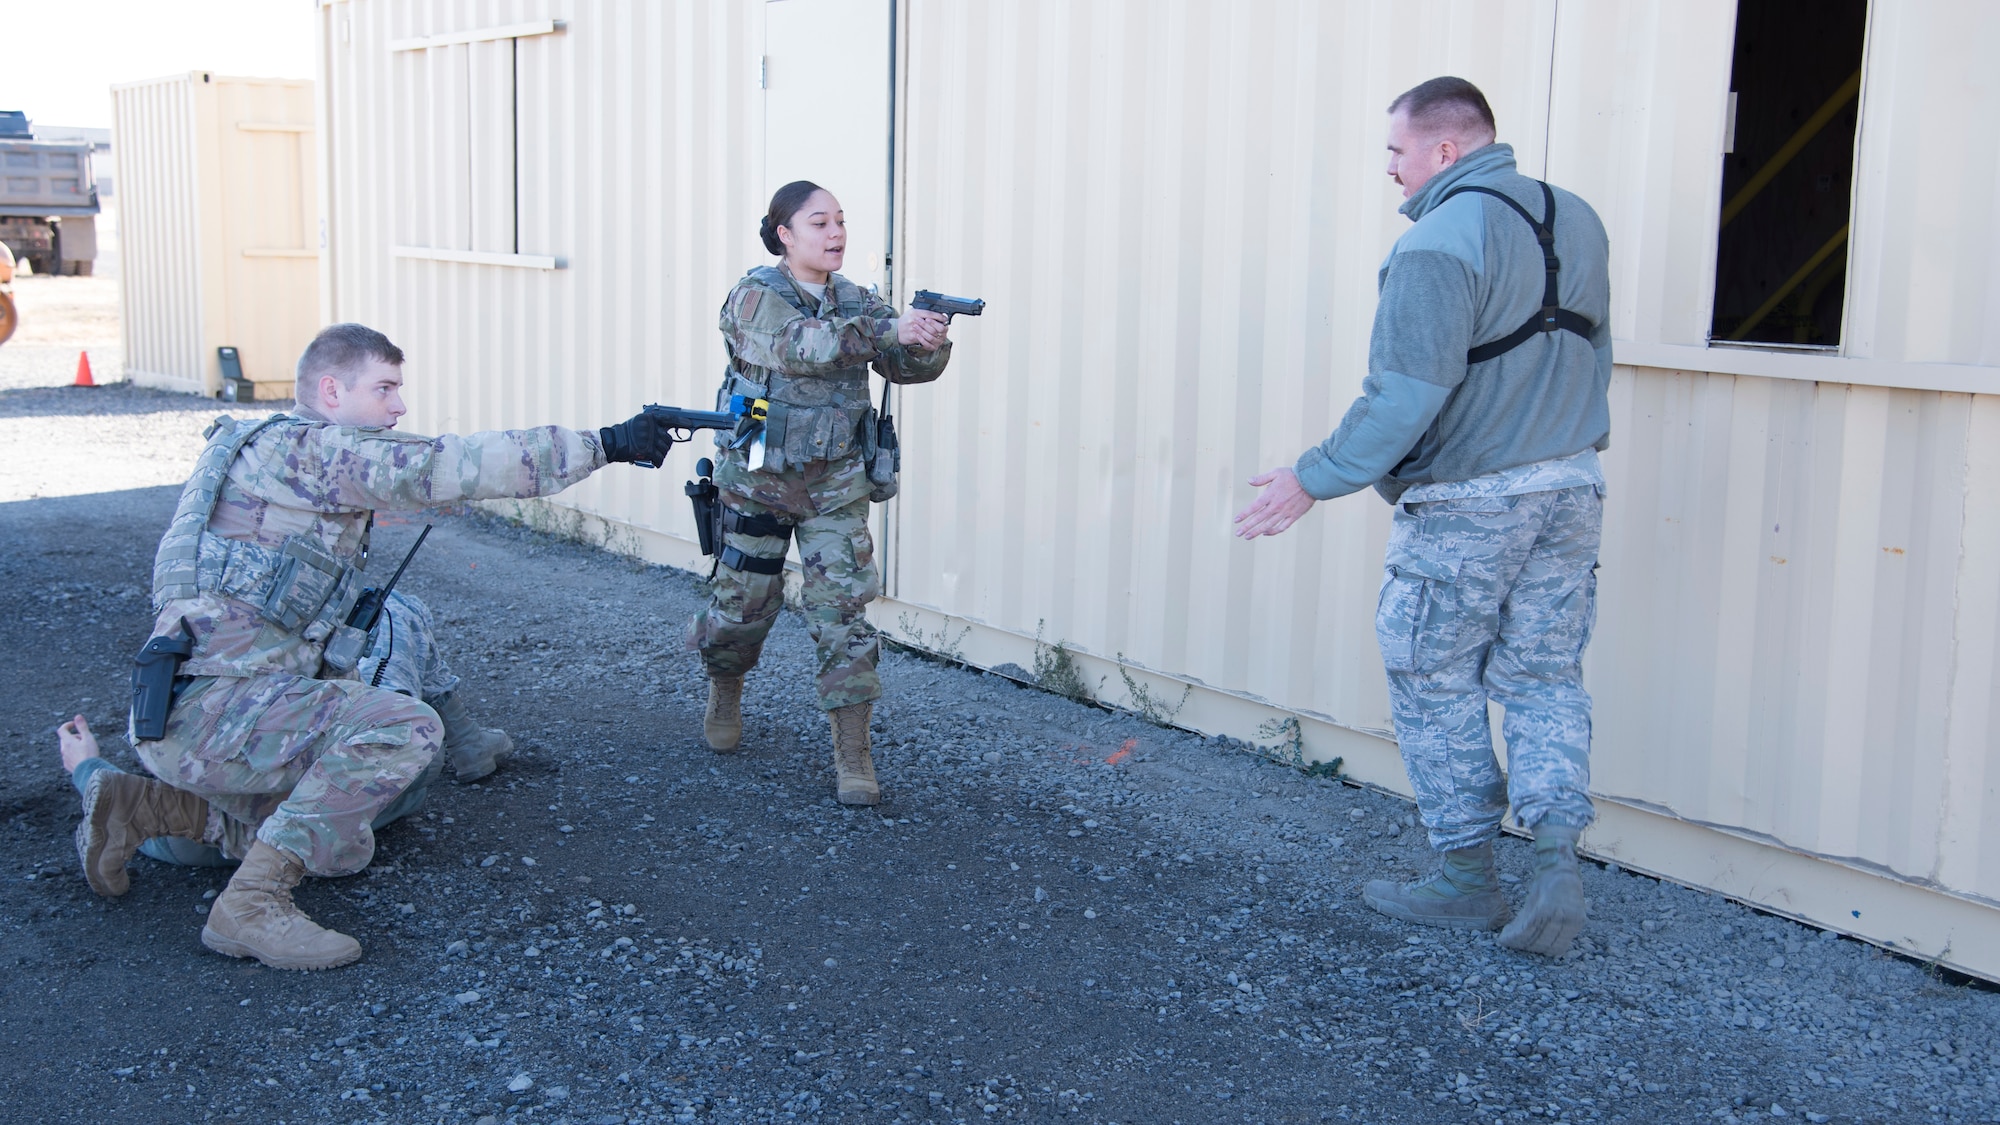 Airmen from the 92nd Security Forces Squadron simulate facing-off against an armed role-player during a high-risk situation training exercise at Fairchild Air Force Base, Washington, Oct. 15, 2018. The training scenarios mirrored past events Security Forces Airmen and civilian police forces alike have encountered at both deployed and domestic locations, so instructors already know what has worked in before to prepare their Airmen should it happen again. (U.S. Air Force photo/ Senior Airman Ryan Lackey)